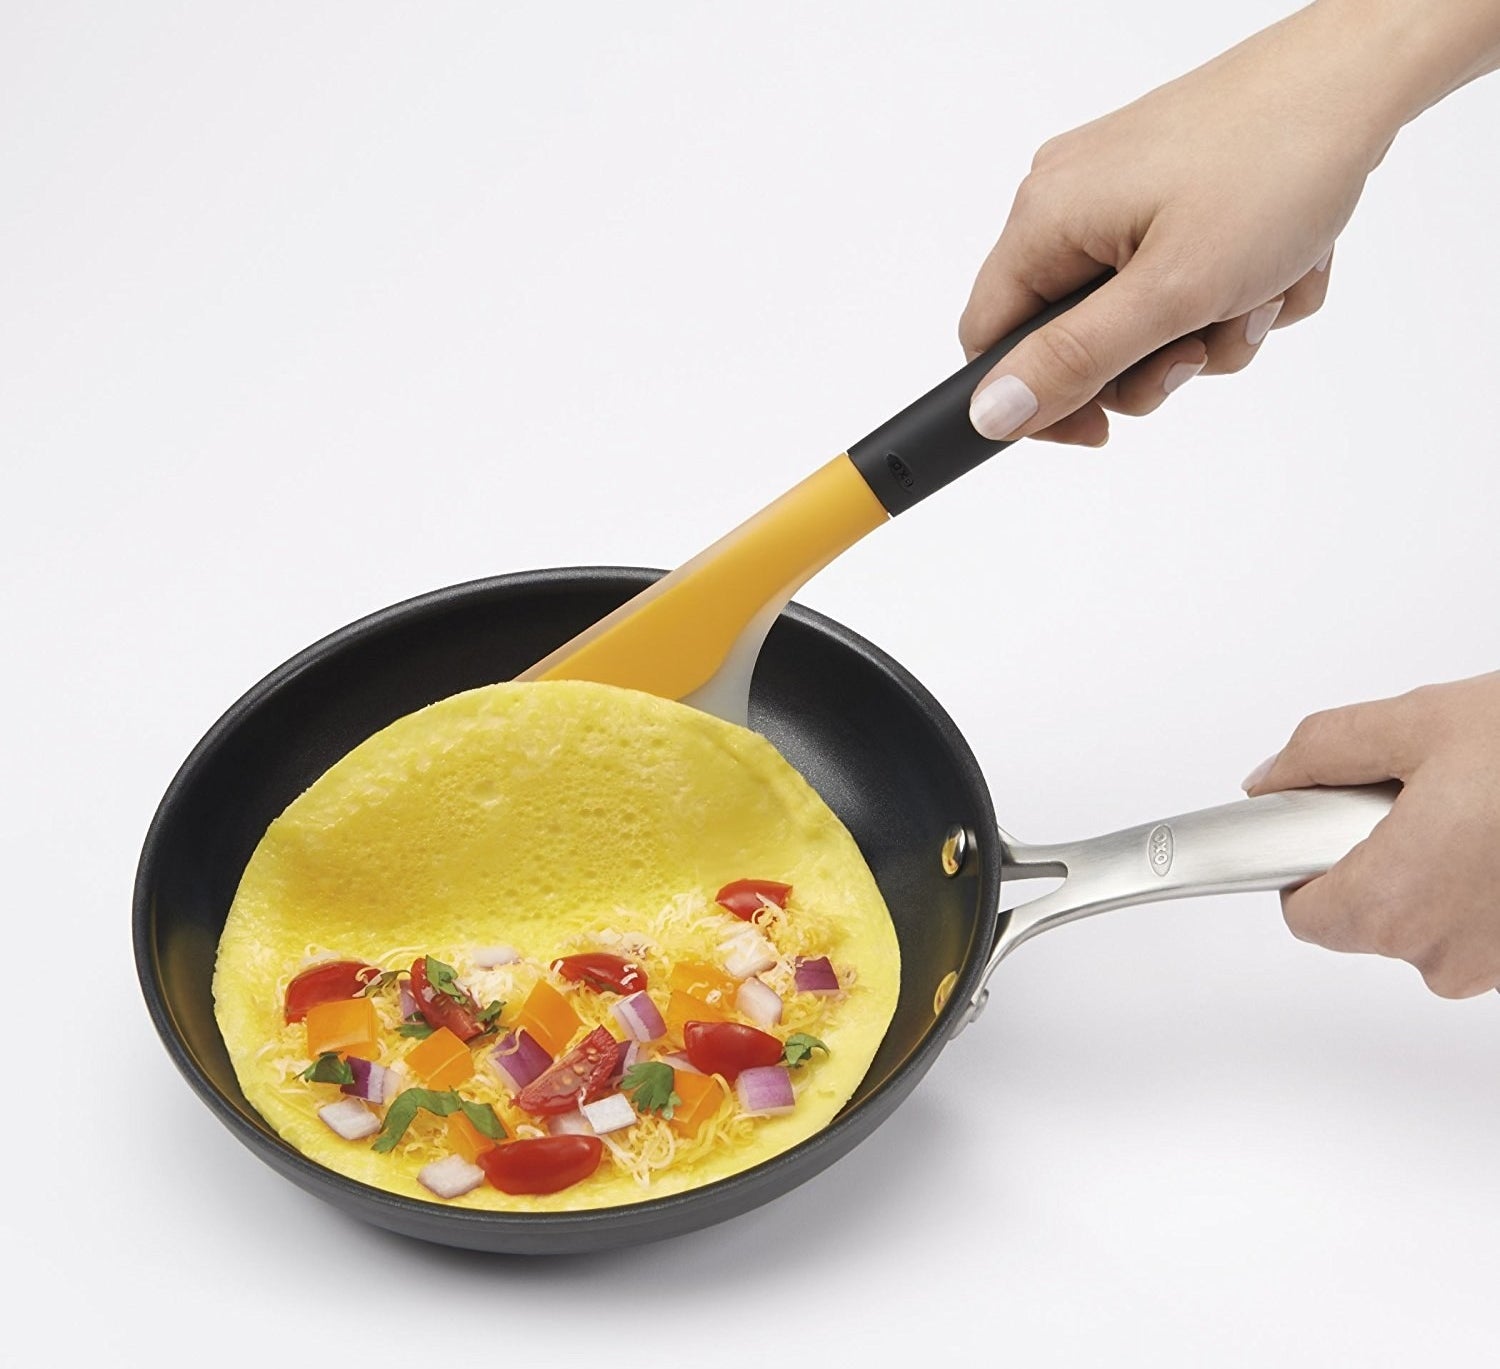 The spatula folding an omelet in half